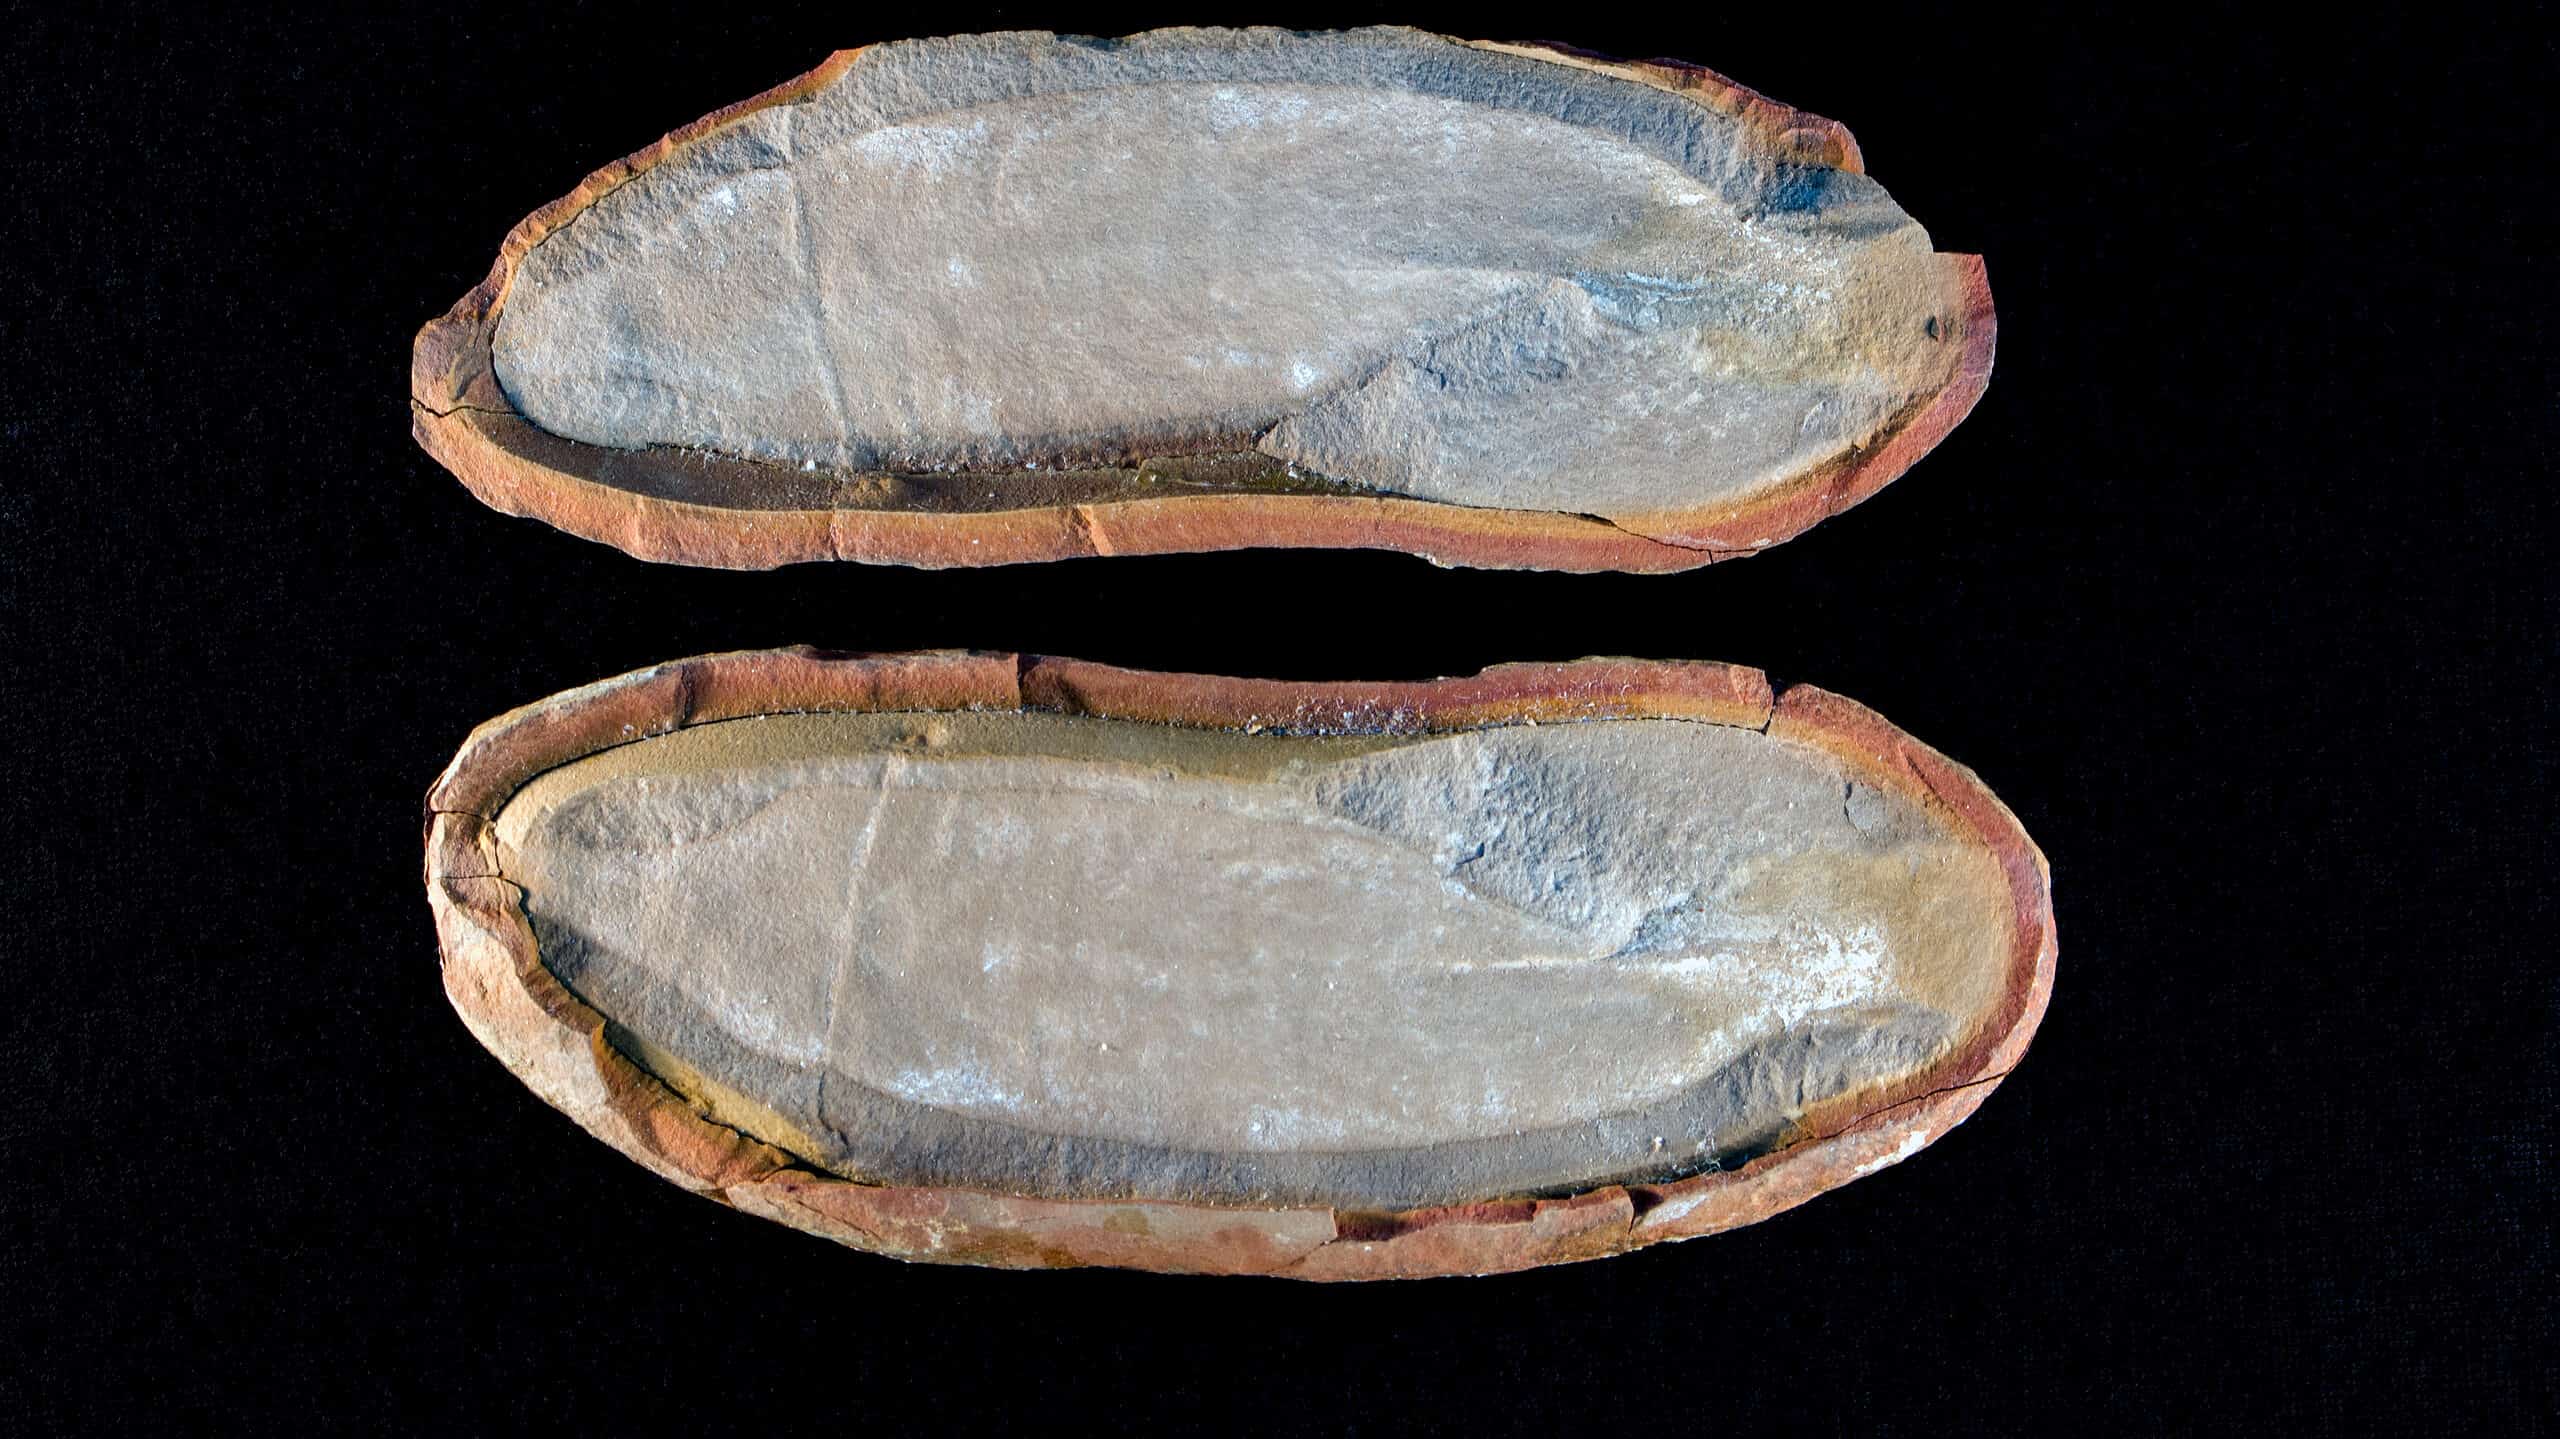 A Tully Monster fossil